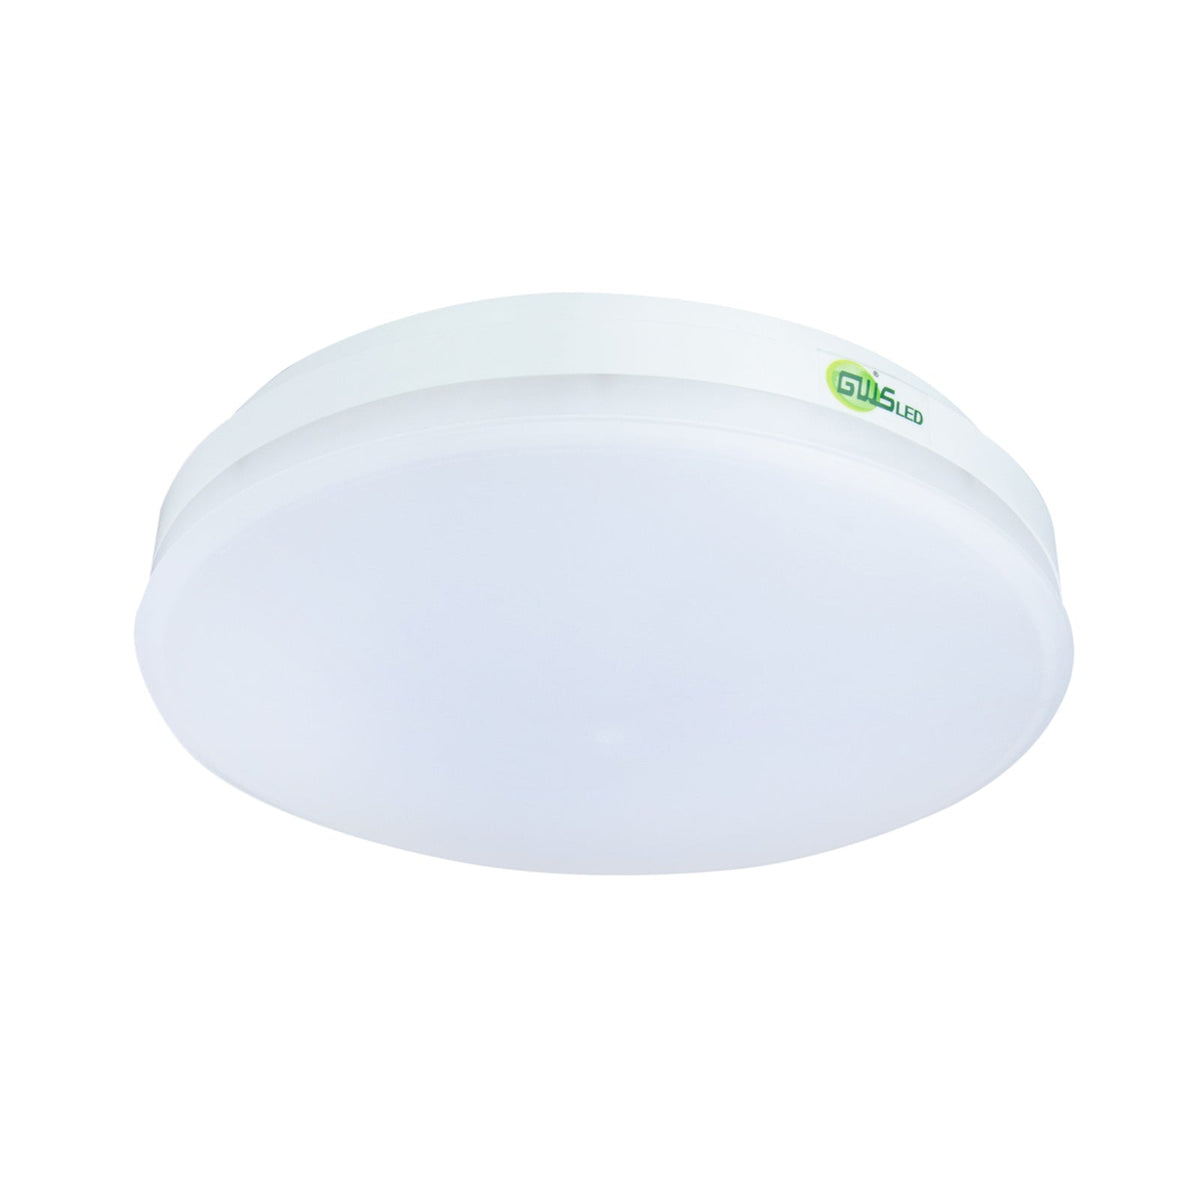 G.W.S LED Wholesale LED Ceiling Lights 18W / Tricolour (3000K+4000K+6000K) IP65 18W Slim LED Ceiling Light With 3 Colours Built-in